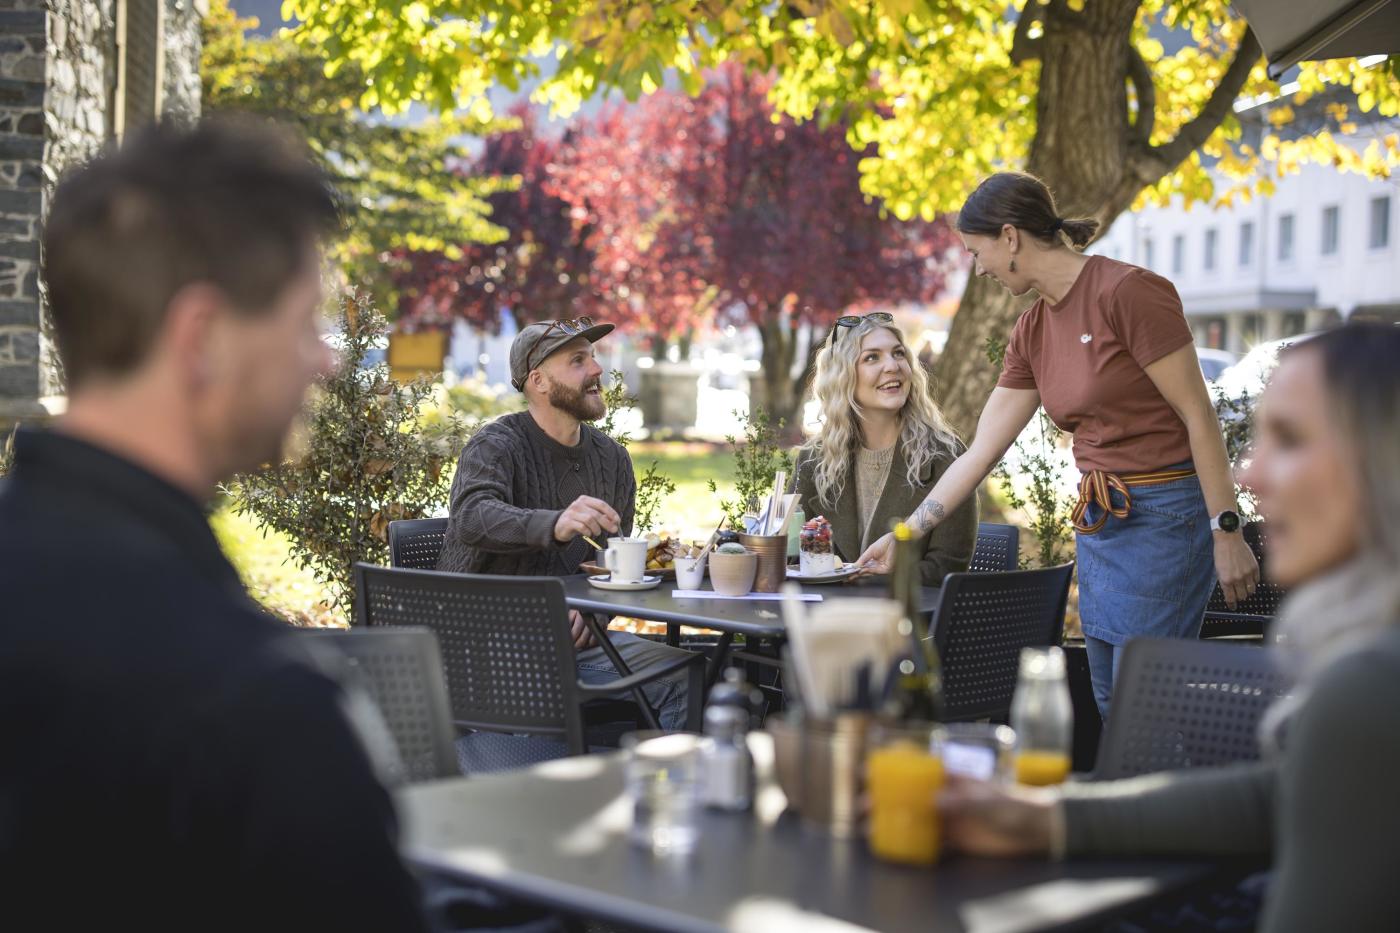 Waitress serving customers in a pretty outdoor autumn setting